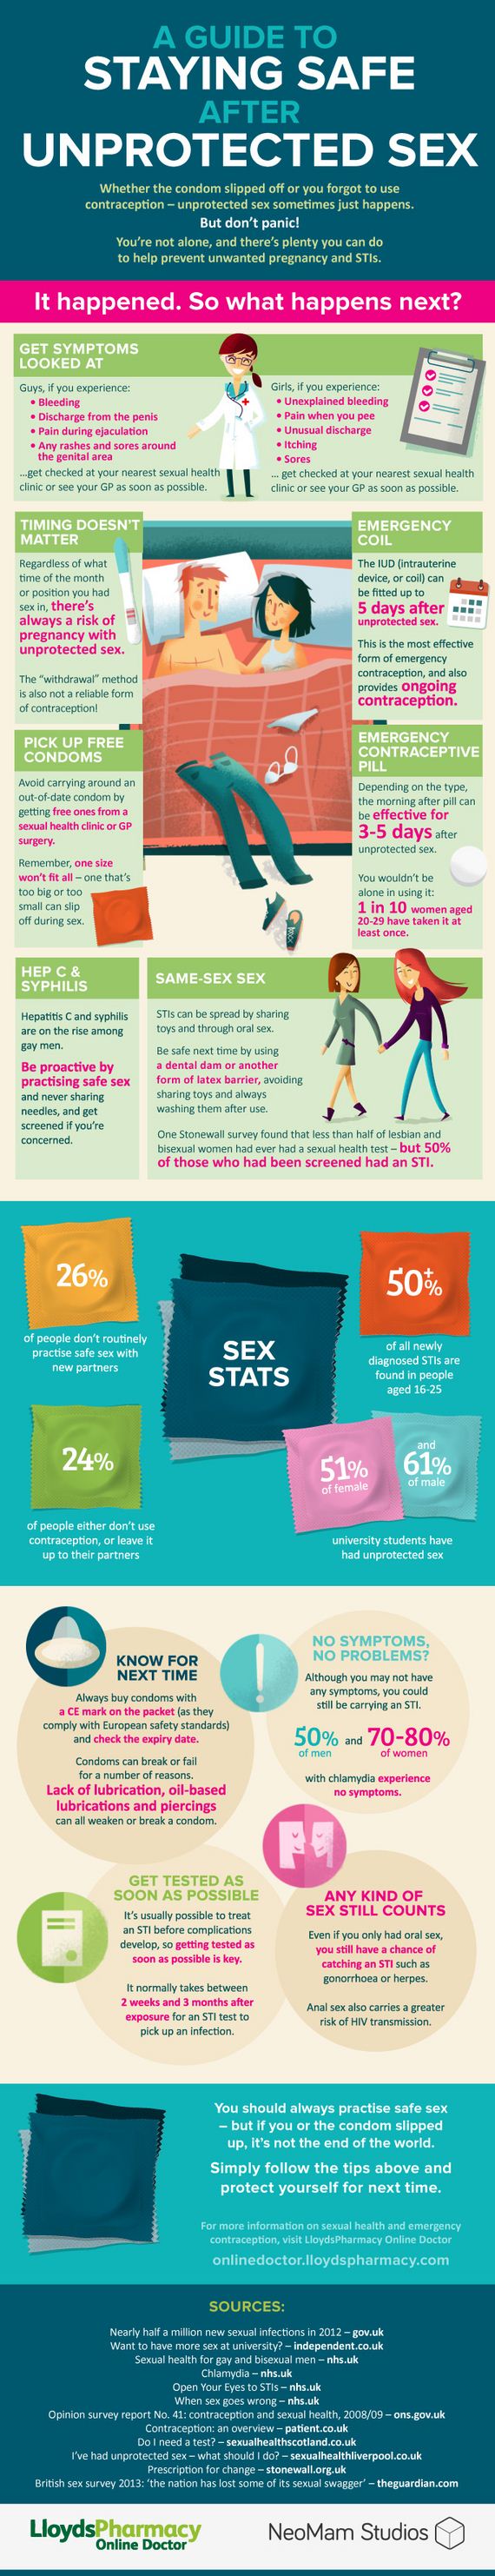 A-Guide-to-Staying-Safe-After-Sex-V5